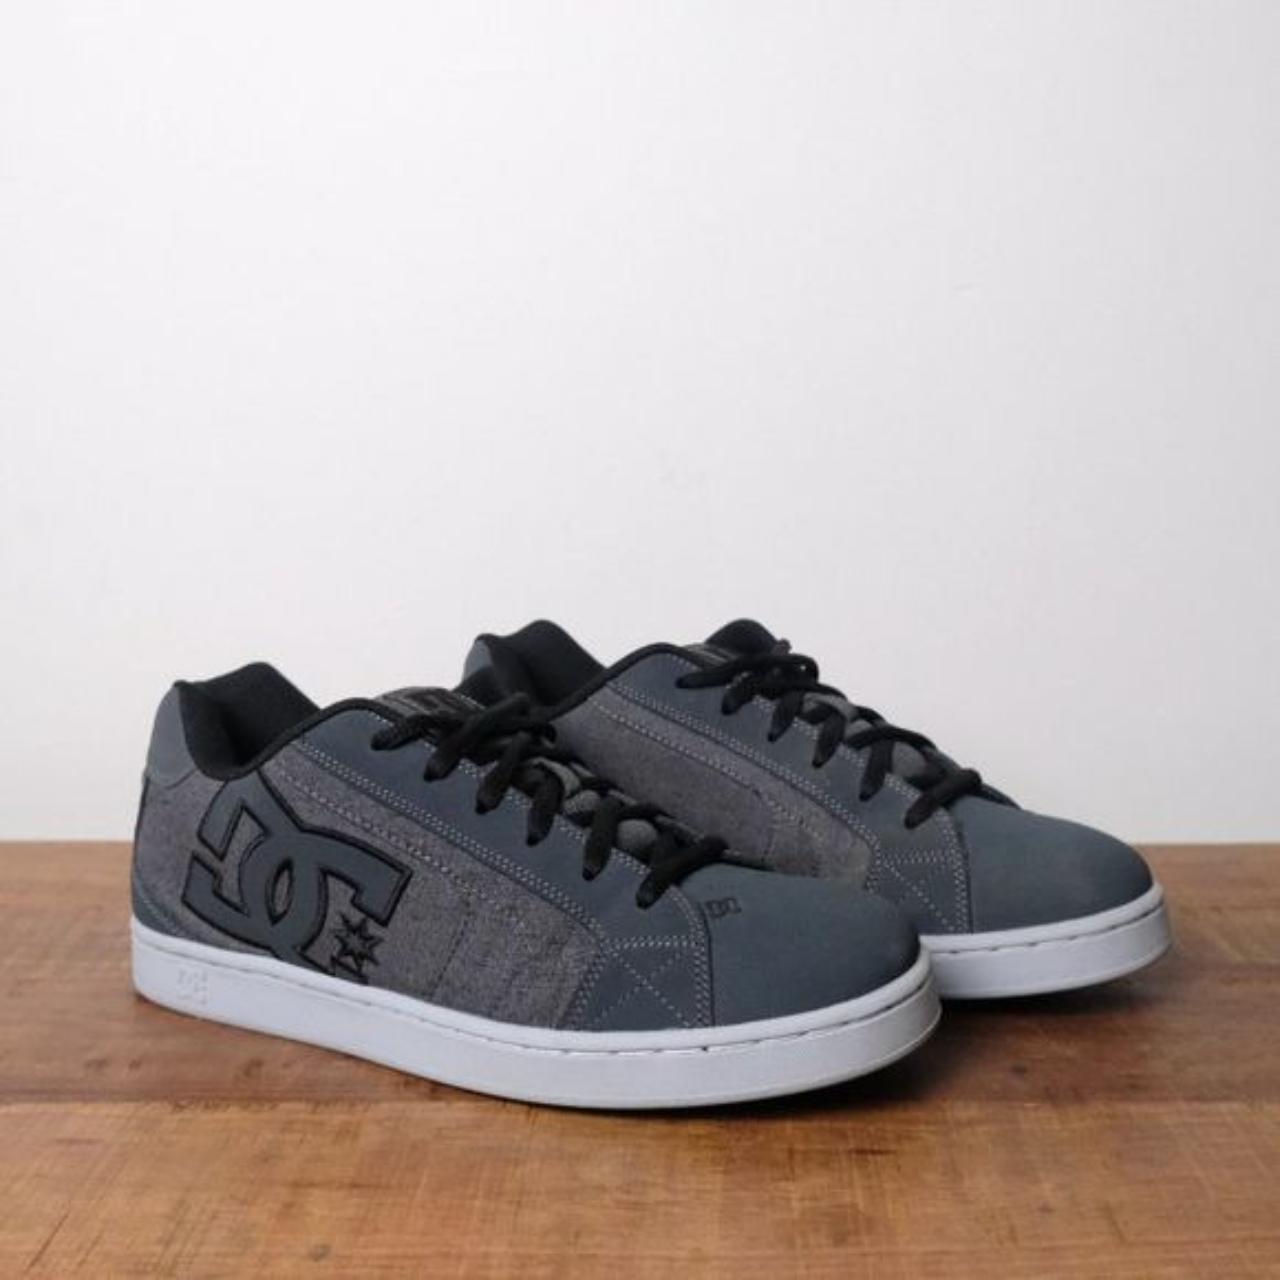 DC Net SE Trainers in Black Resin